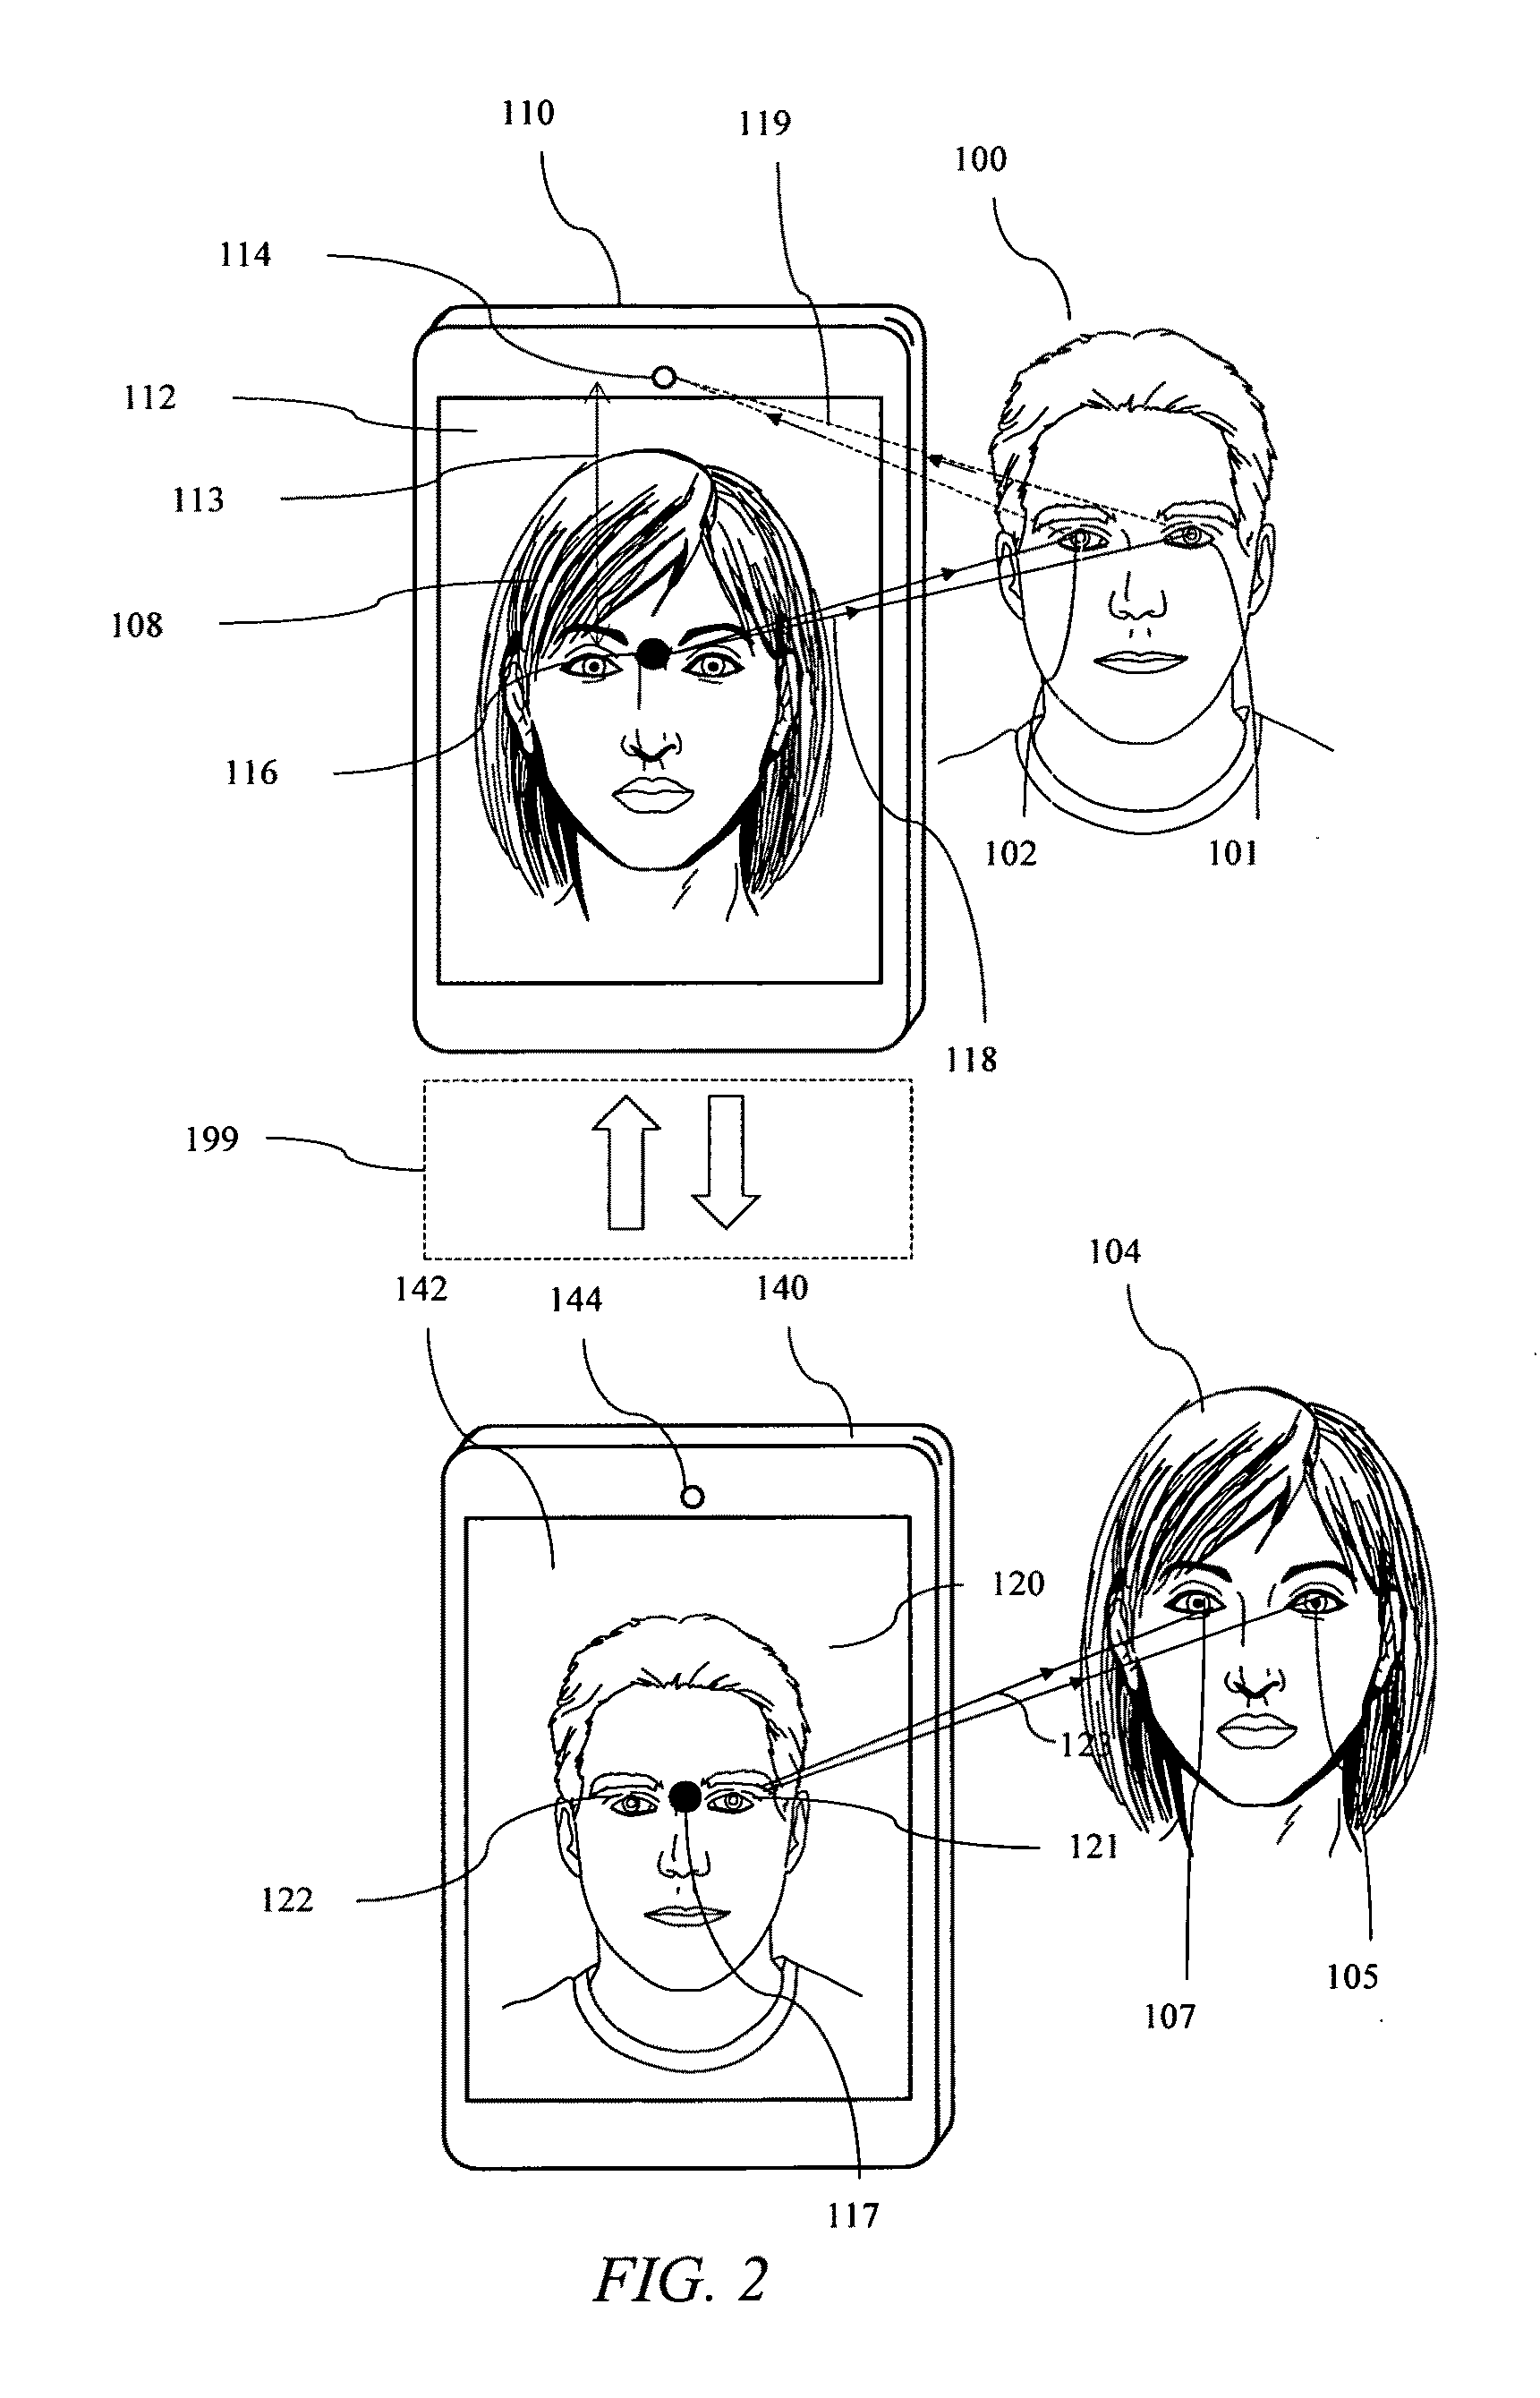 Adjustment Of Perceived Roundness In Stereoscopic Image Of A Head